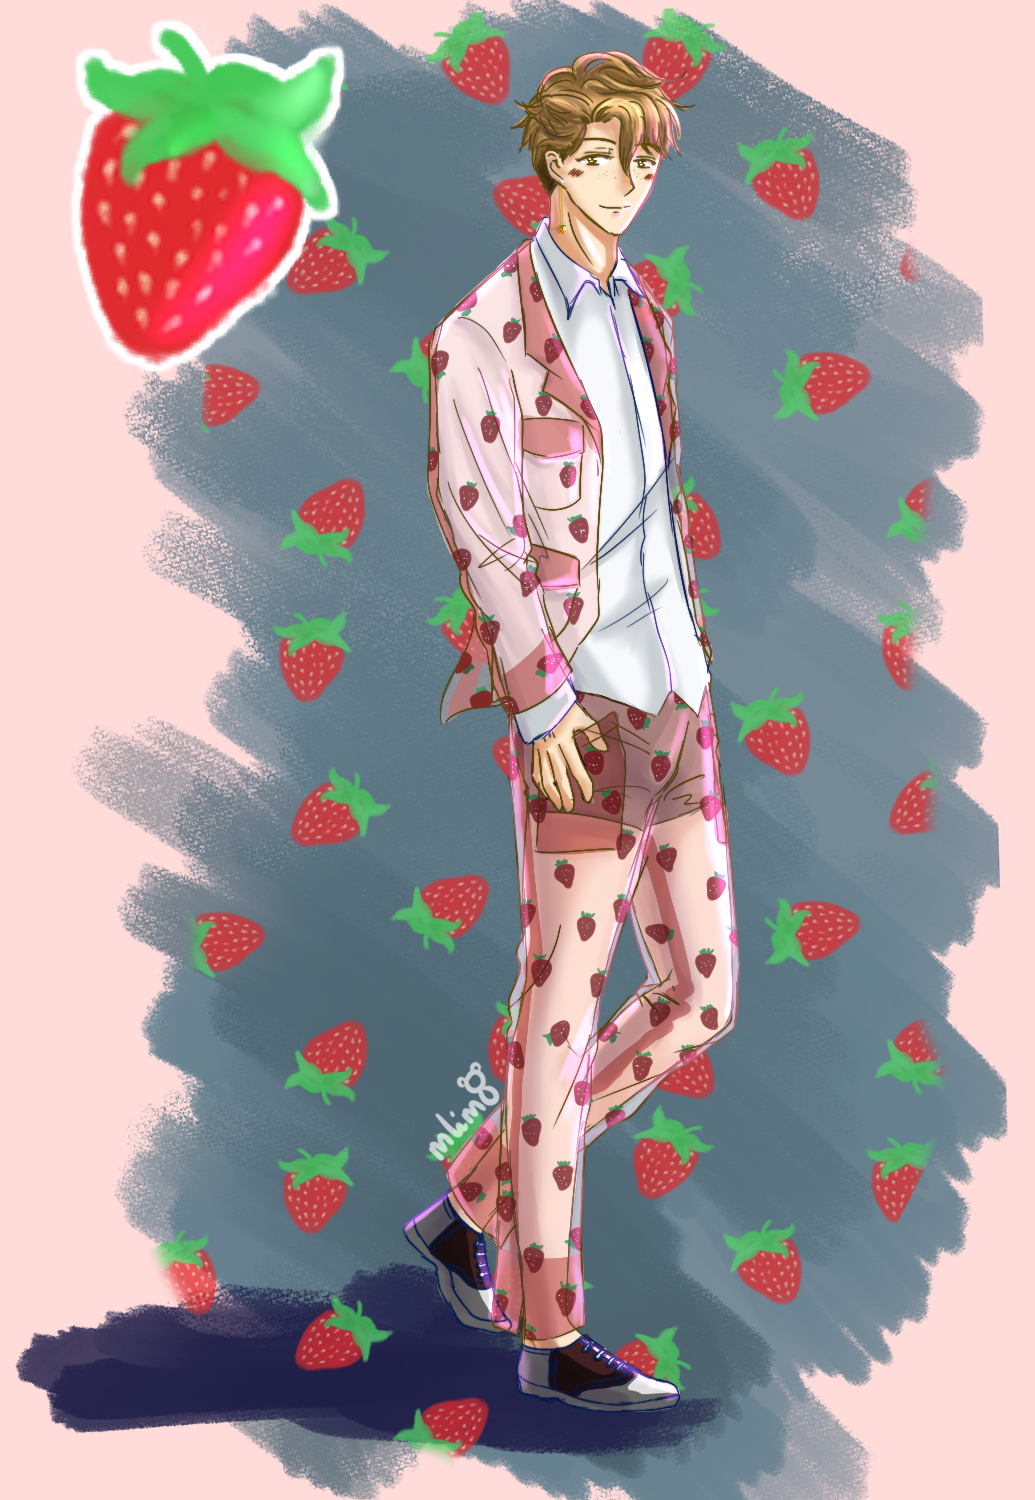 REMUS IN THE STRAWBERRY DRESS ...